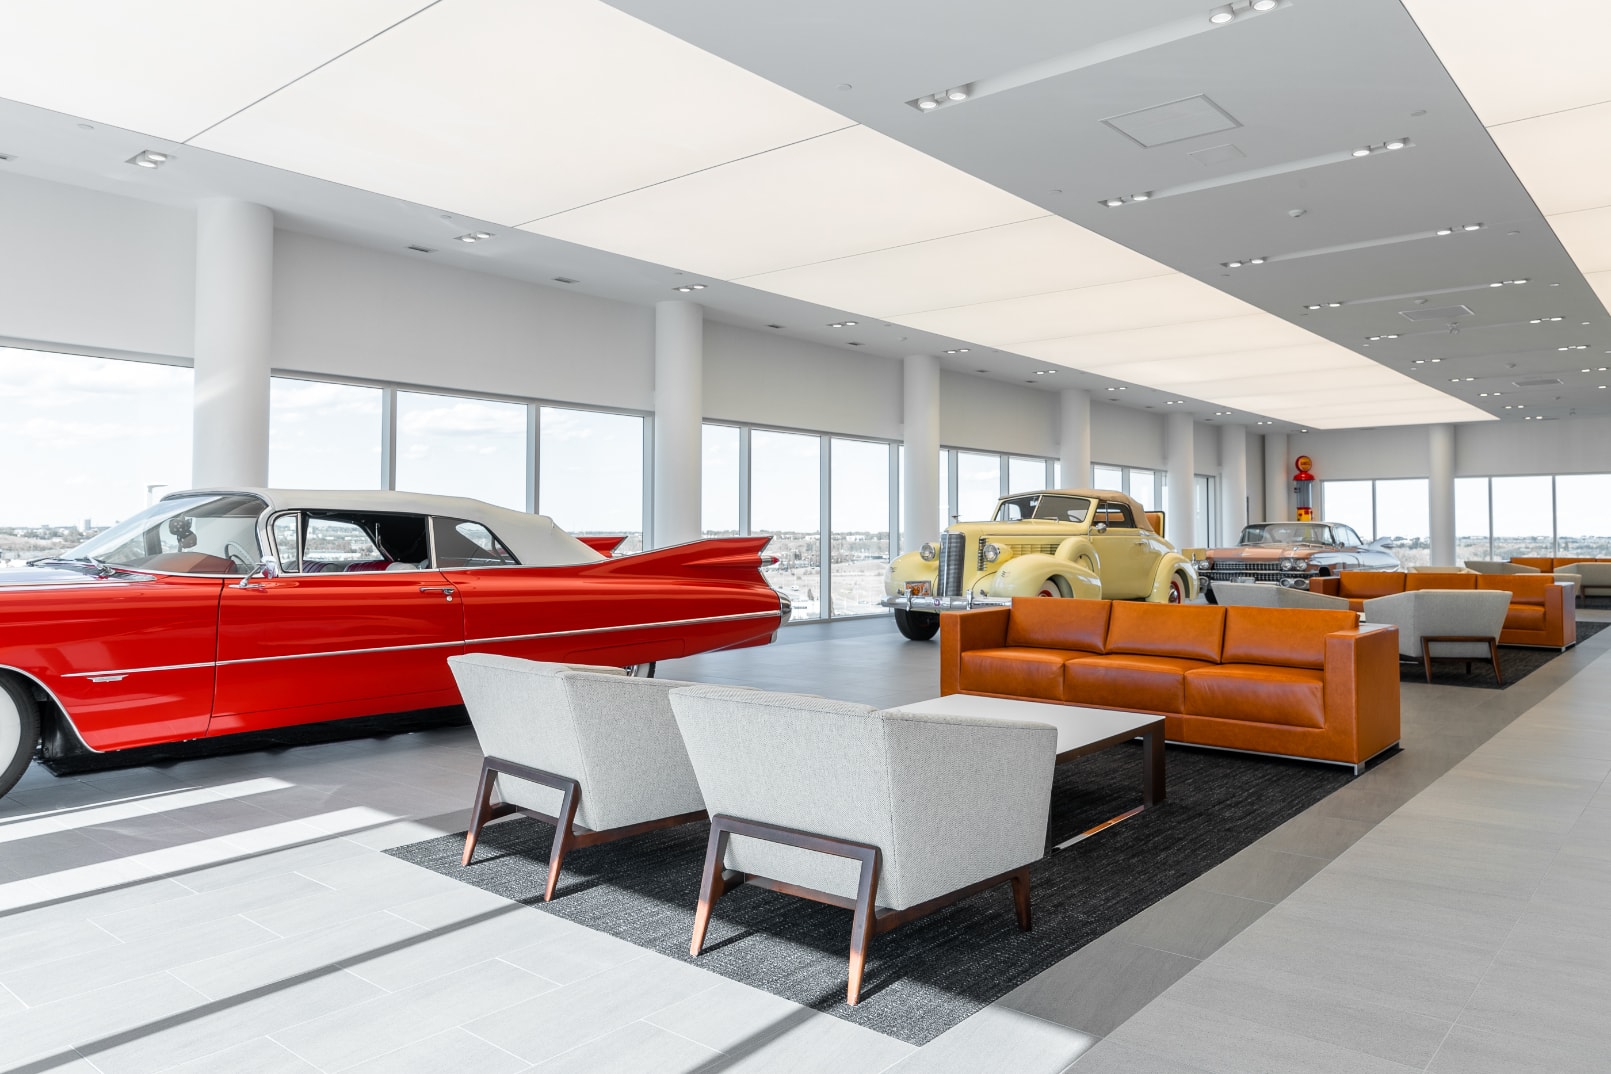 Customer seating area with cars surrounding in the showroom at Carter Cadillac.